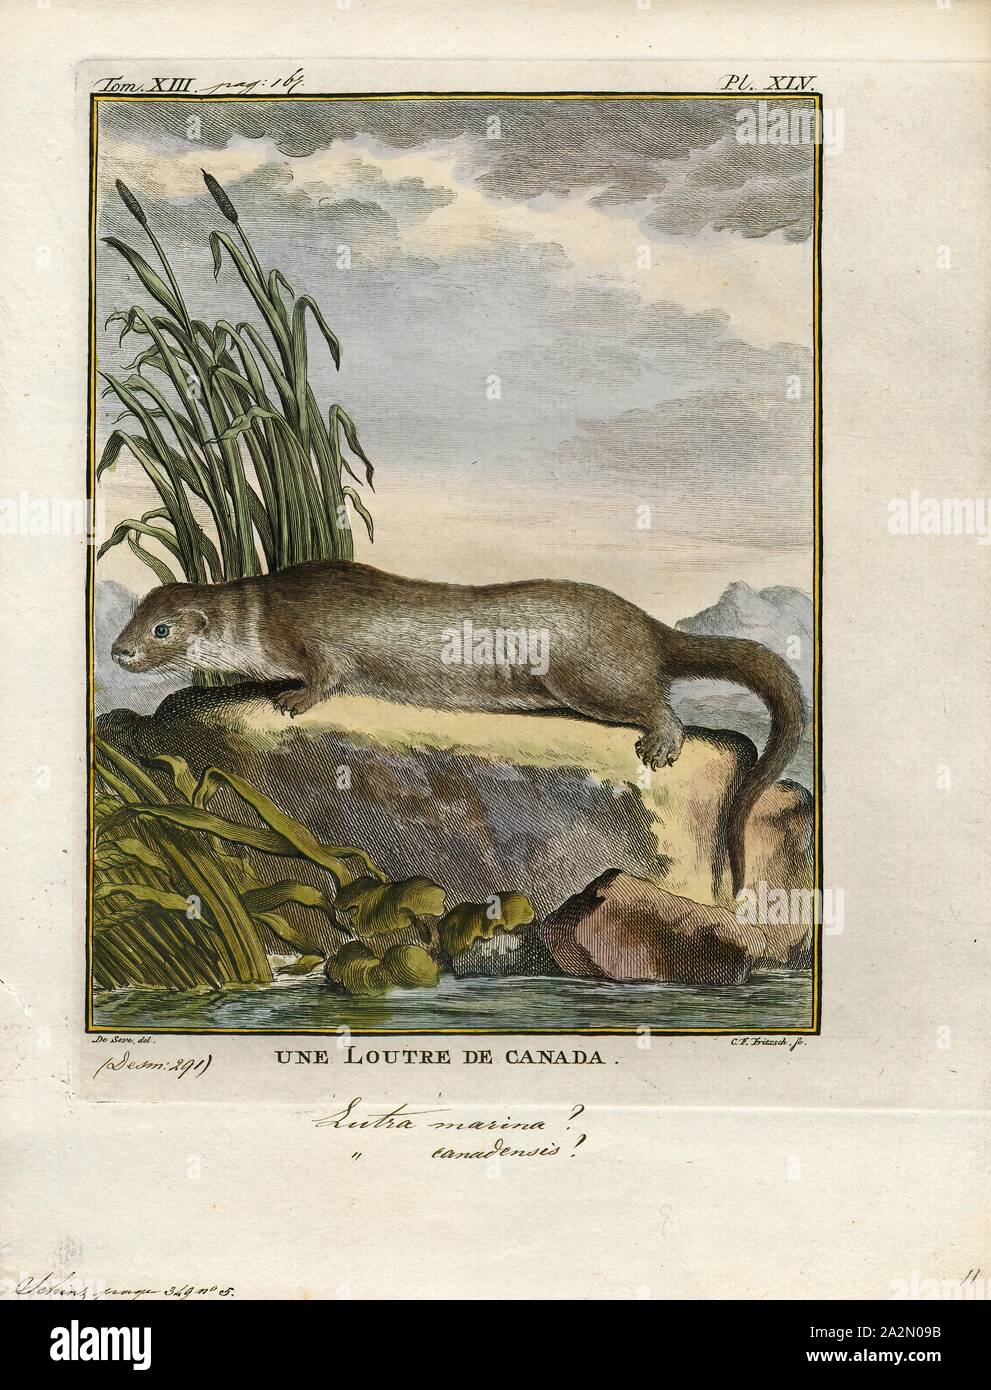 Lutra canadensis, Print, The North American river otter (Lontra canadensis), also known as the northern river otter or the common otter, is a semiaquatic mammal endemic to the North American continent found in and along its waterways and coasts. An adult North American river otter can weigh between 5.0 and 14 kg (11.0 and 30.9 lb). The river otter is protected and insulated by a thick, water-repellent coat of fur., 1700-1880 Stock Photo